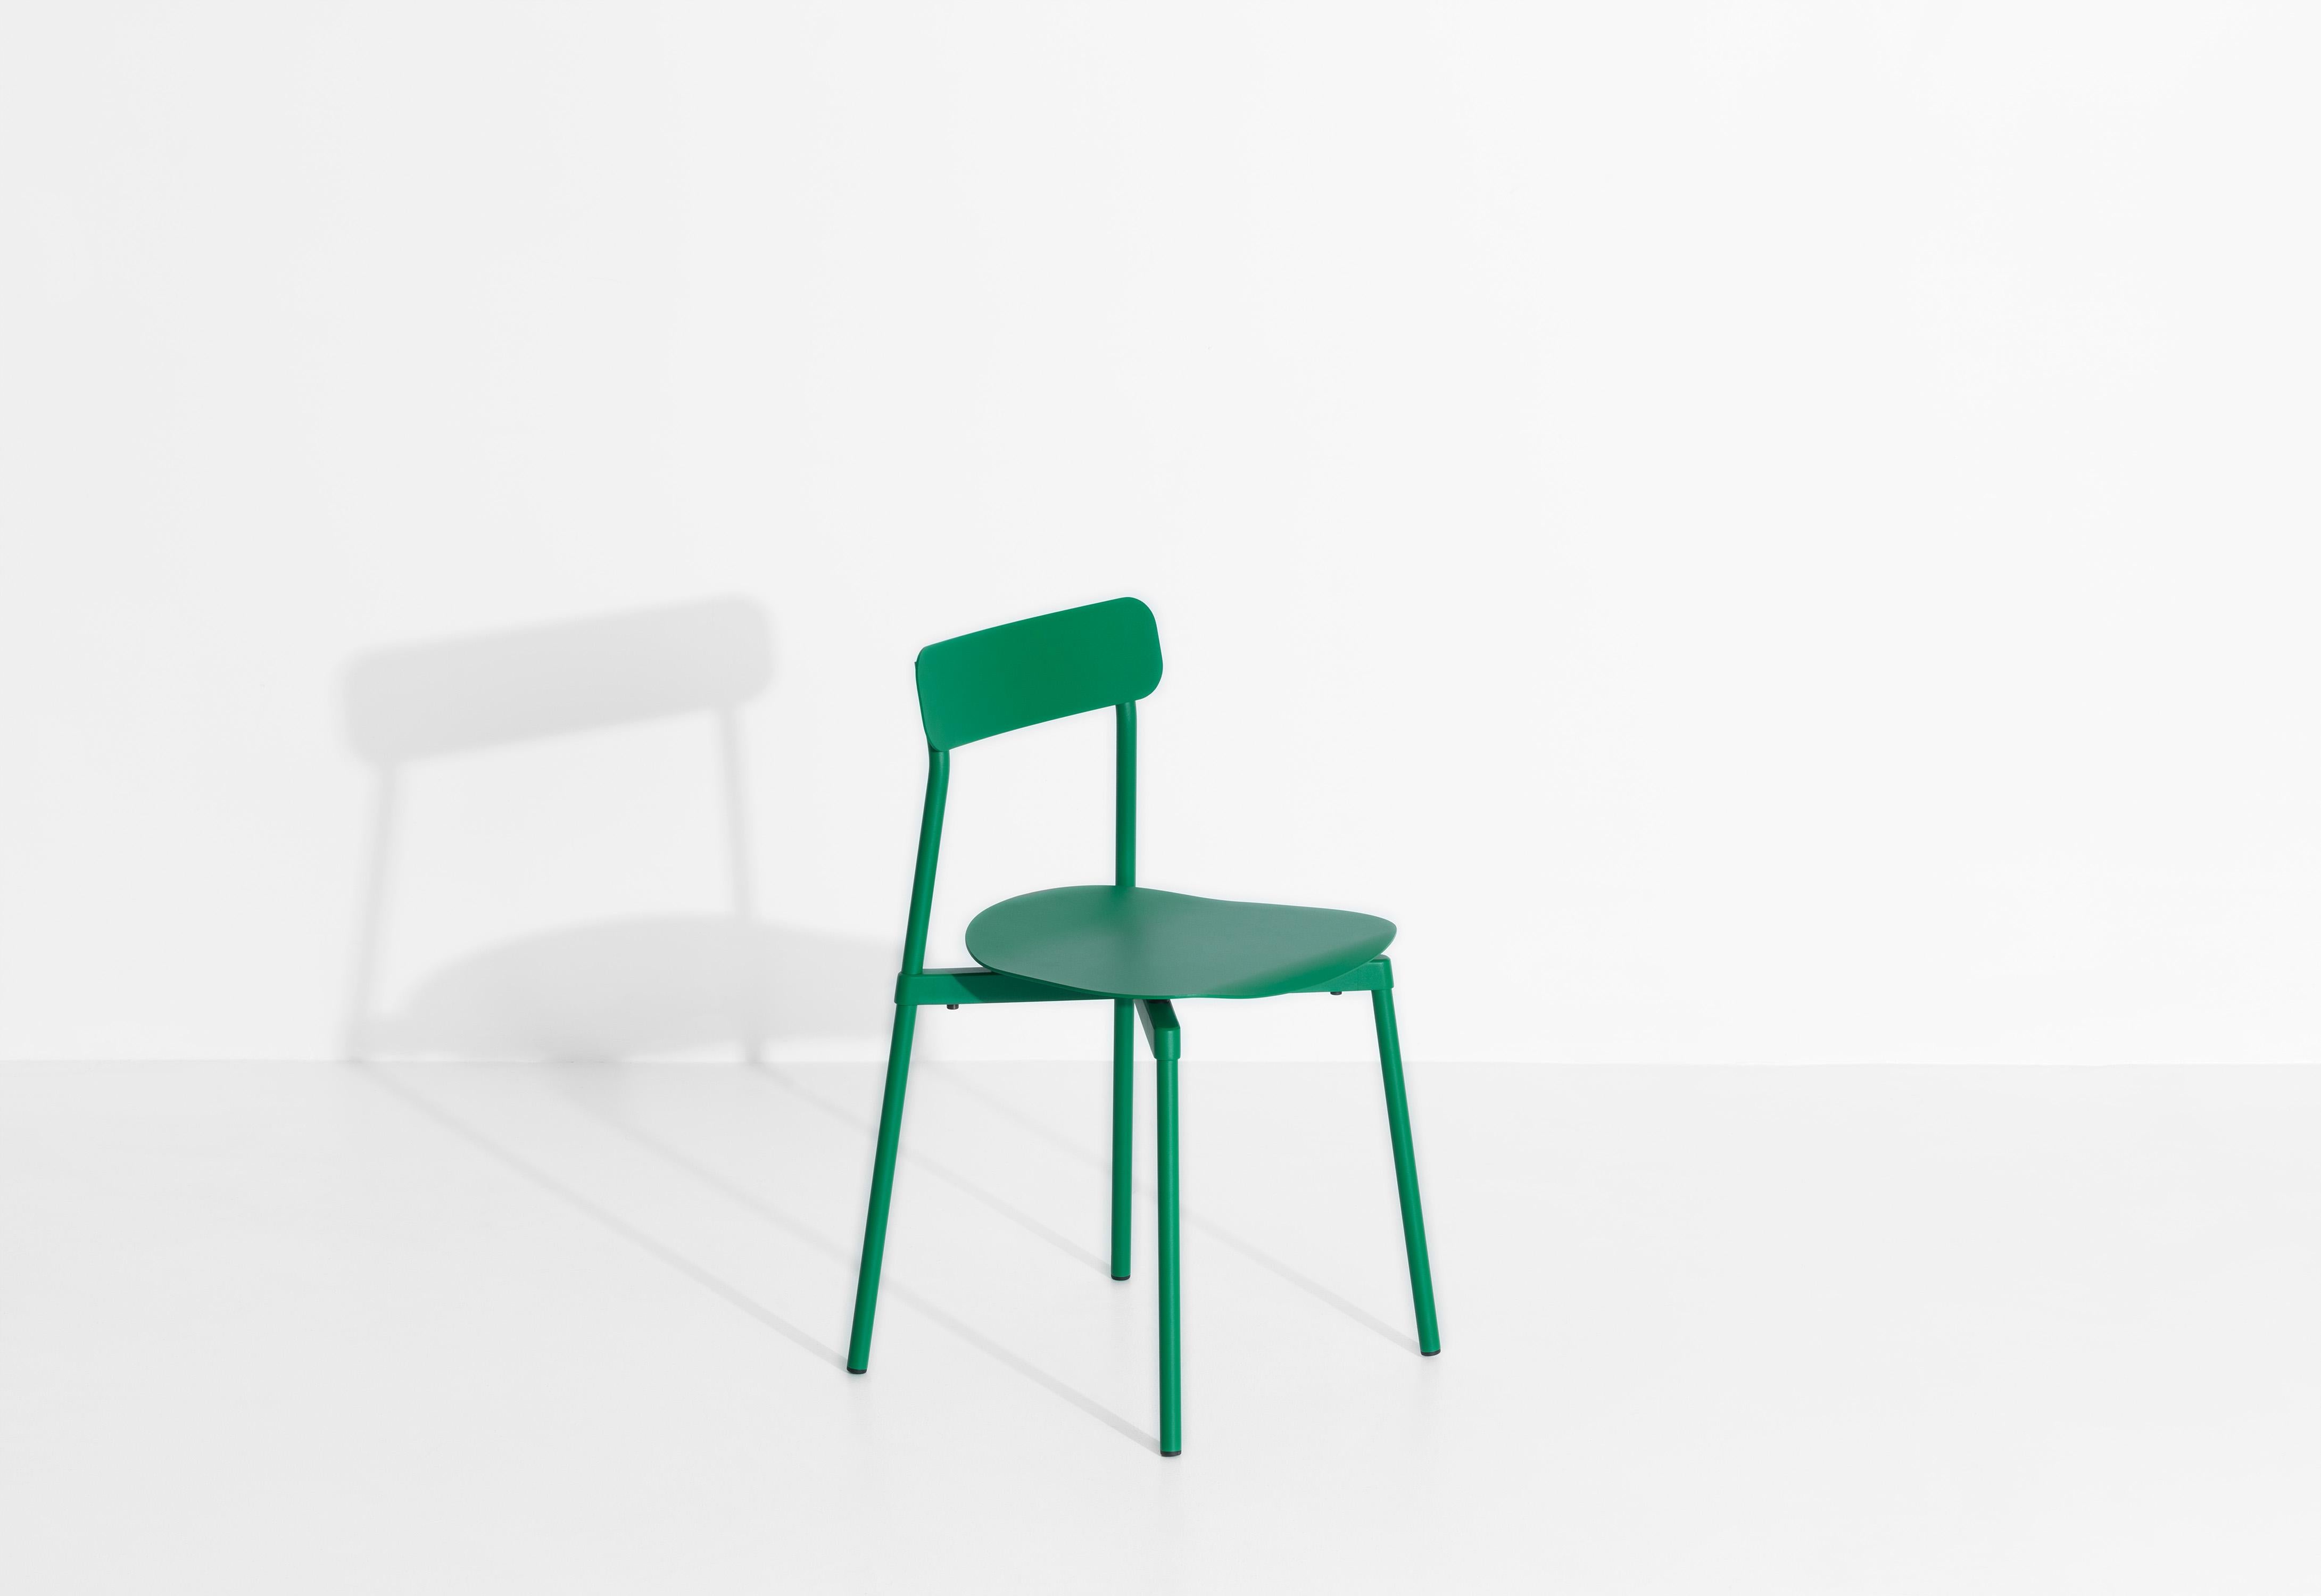 Contemporary Petite Friture Fromme Chair in Mint-Green Aluminium by Tom Chung, 2019 For Sale